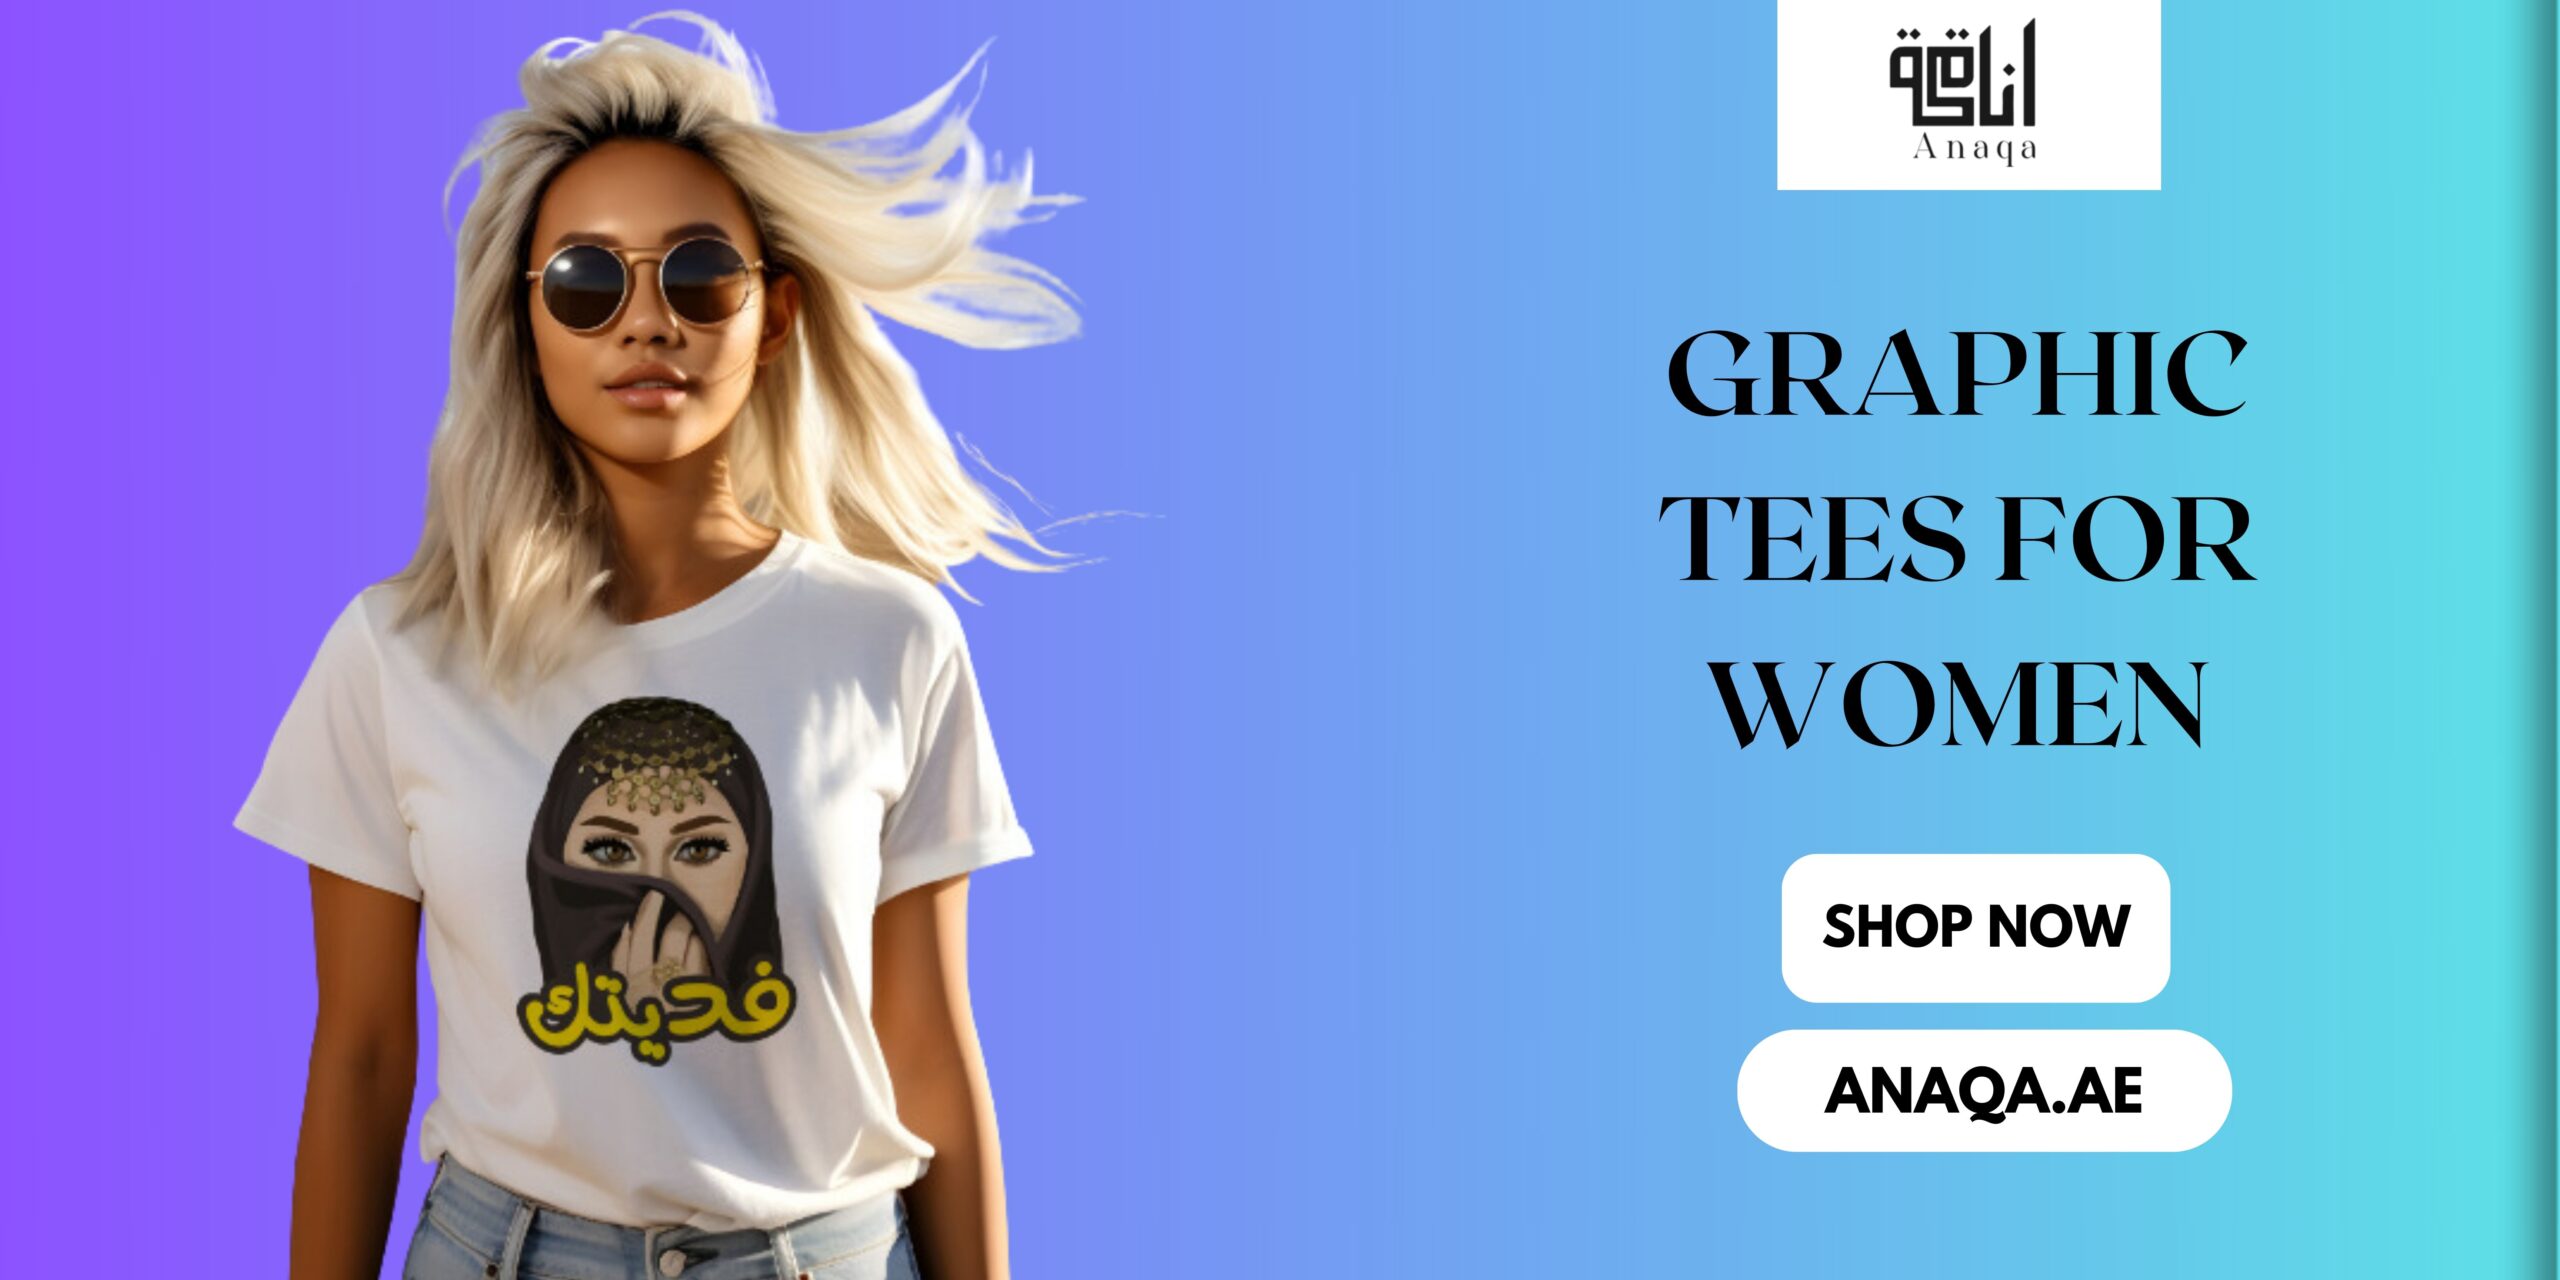 Graphic Tees For Women